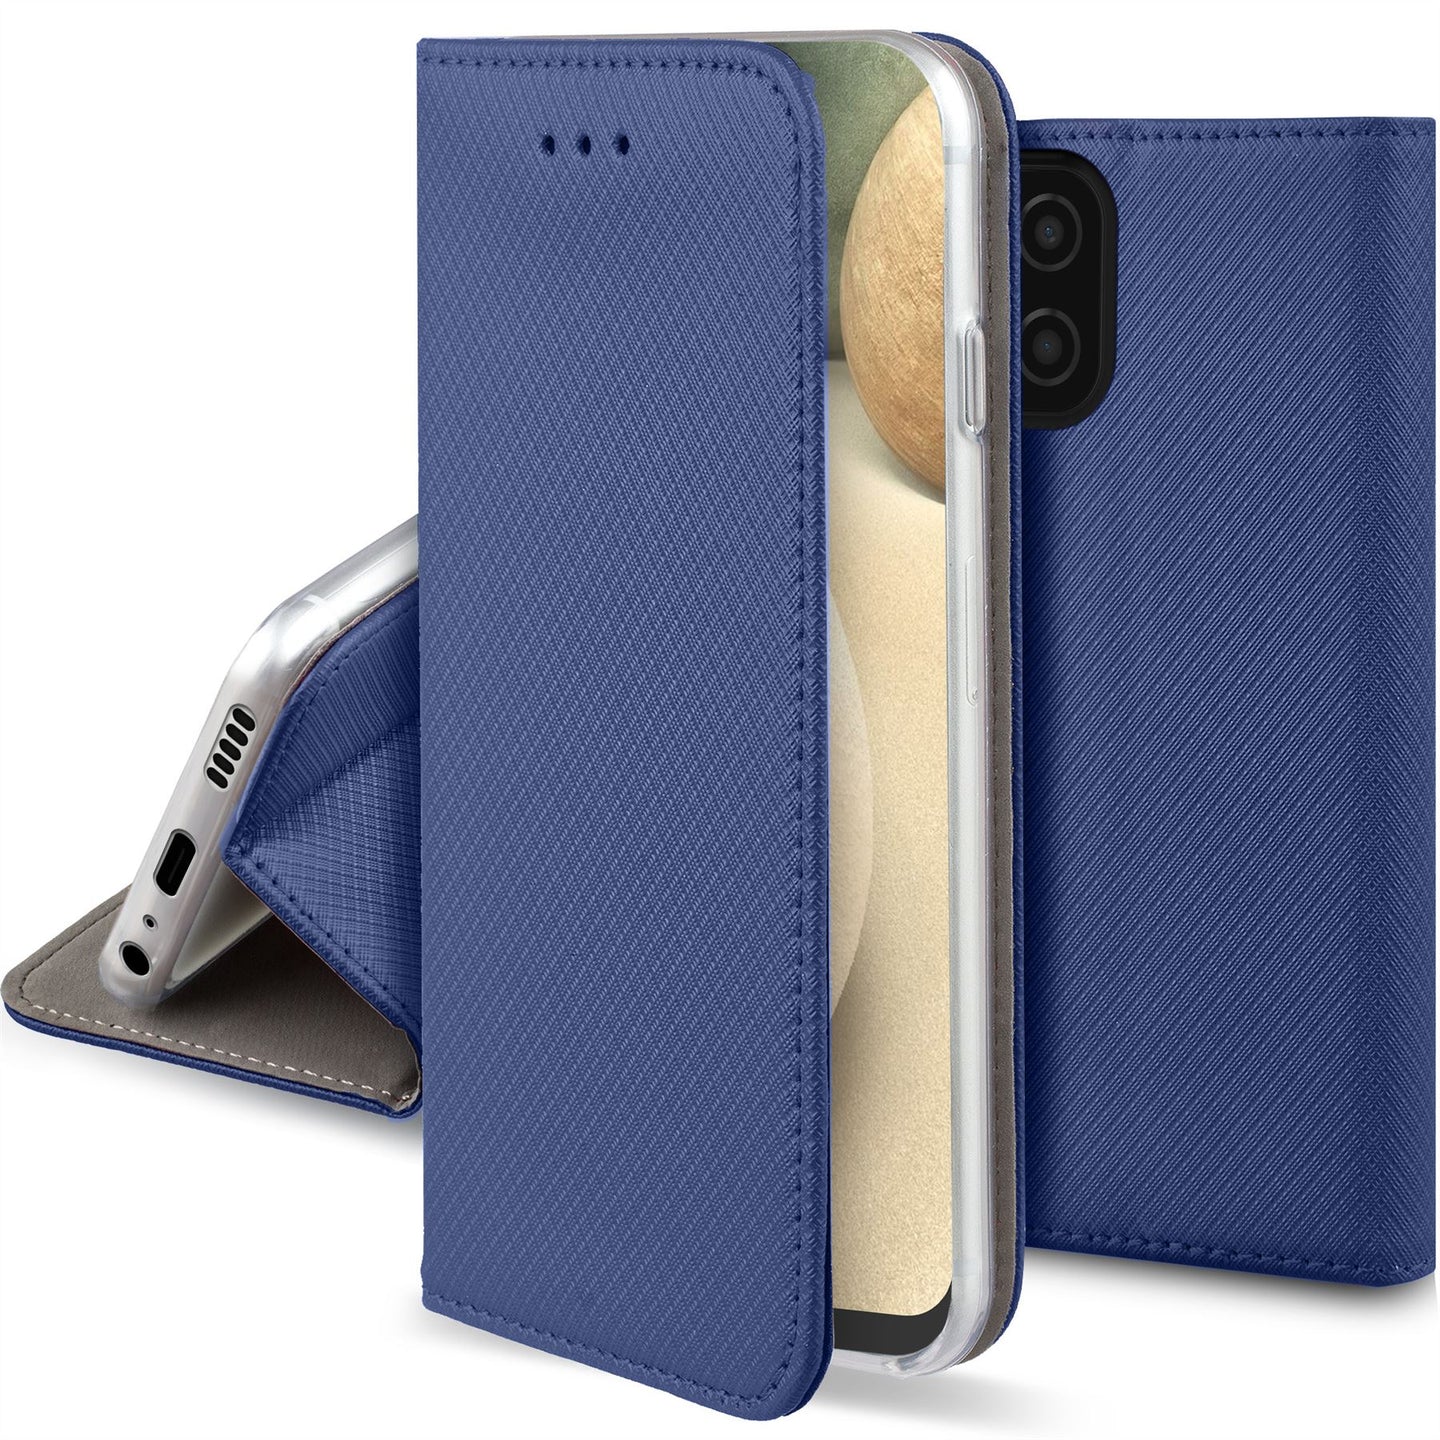 Moozy Case Flip Cover for Samsung A12, Dark Blue - Smart Magnetic Flip Case with Card Holder and Stand